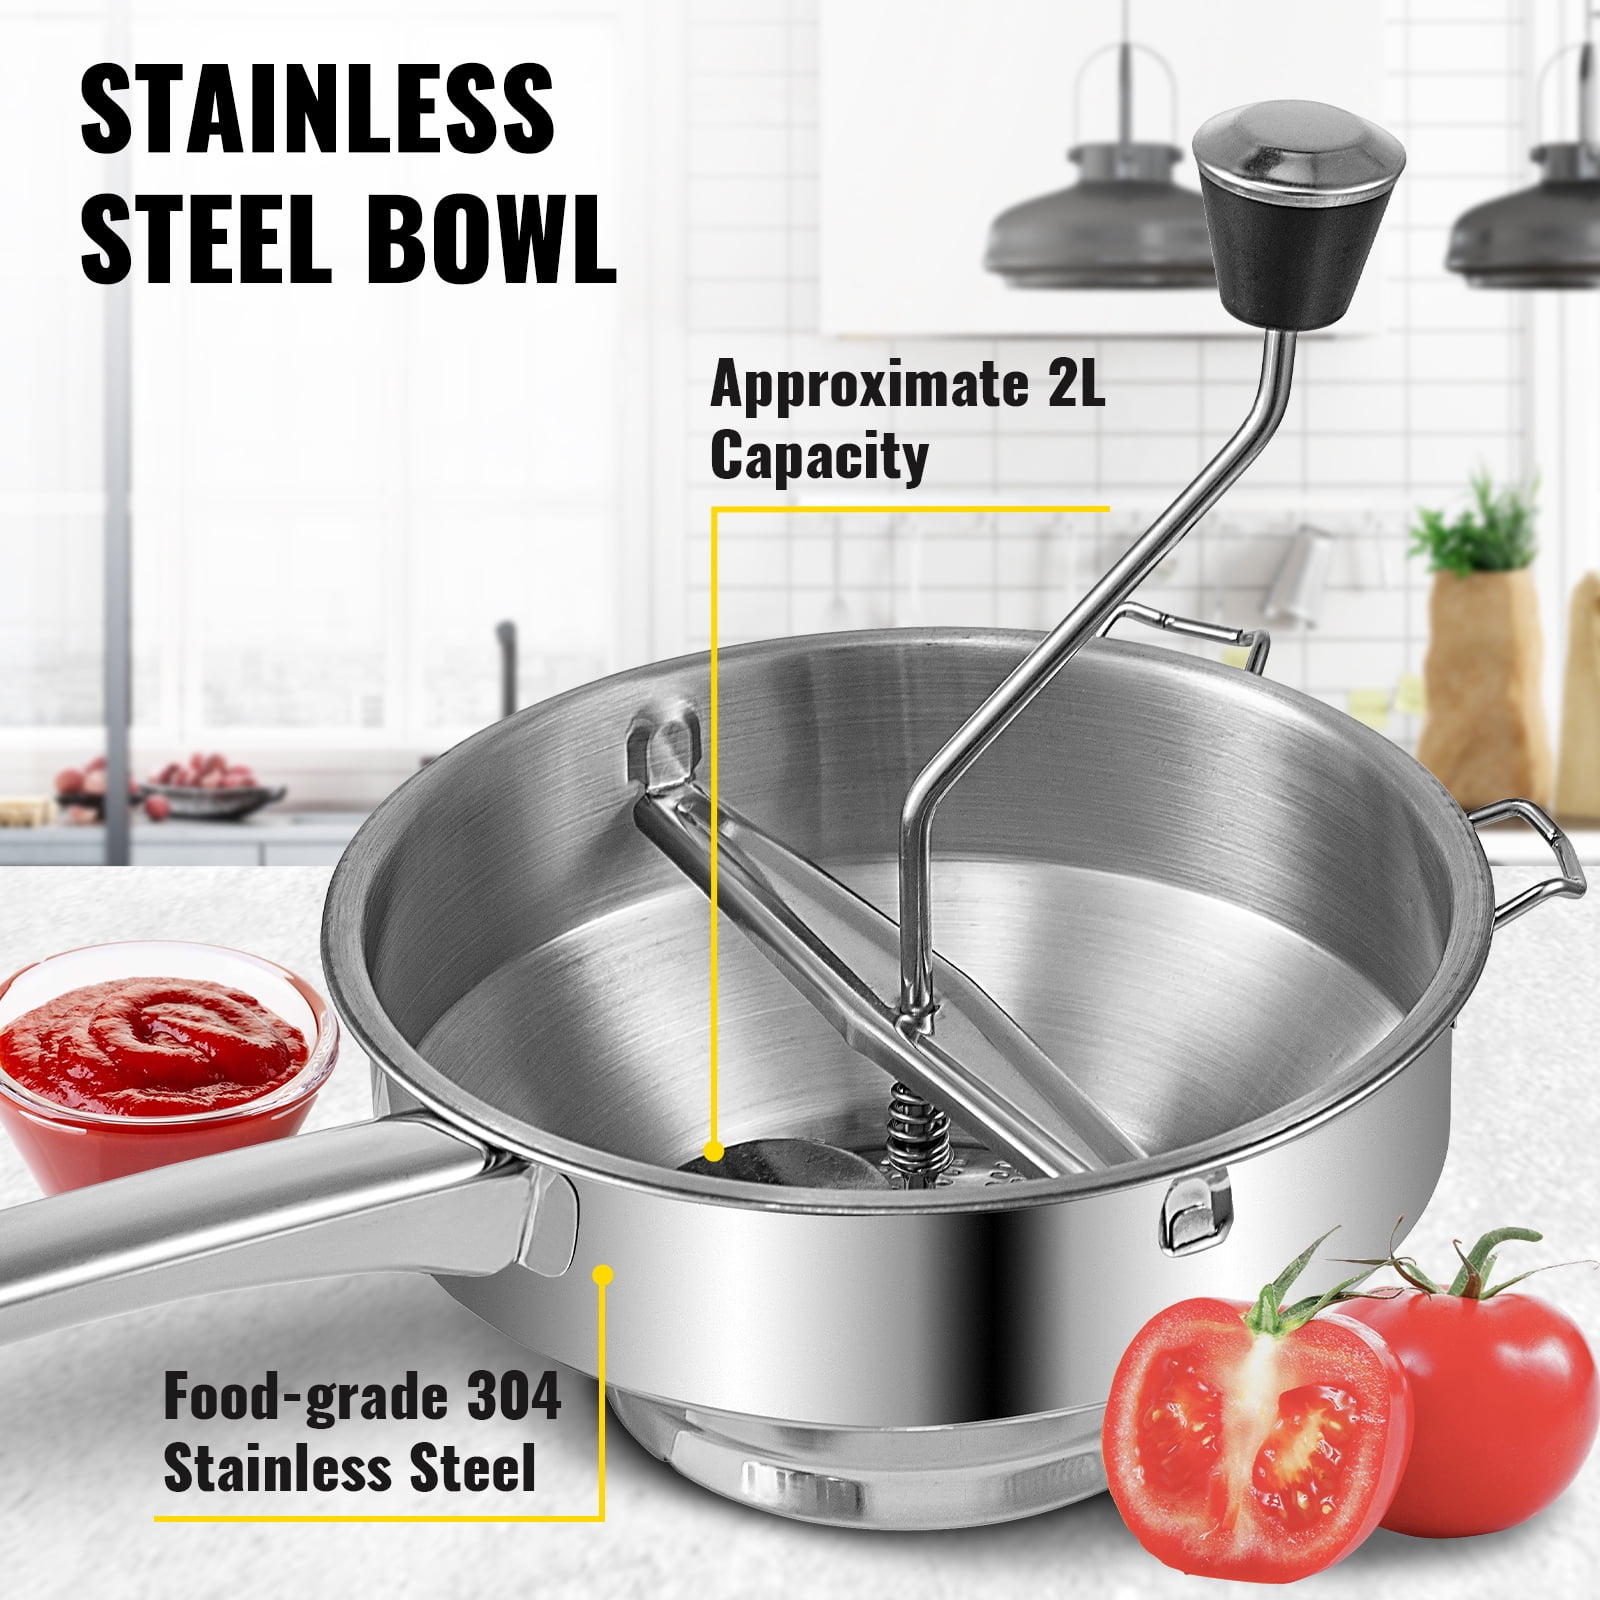 Ergonomic Food Mill Stainless Steel With 3 Grinding Discs, Milling Handle &  Bowl - Rotary Food Mill for Tomato Sauce, Applesauce, Puree, Mashed